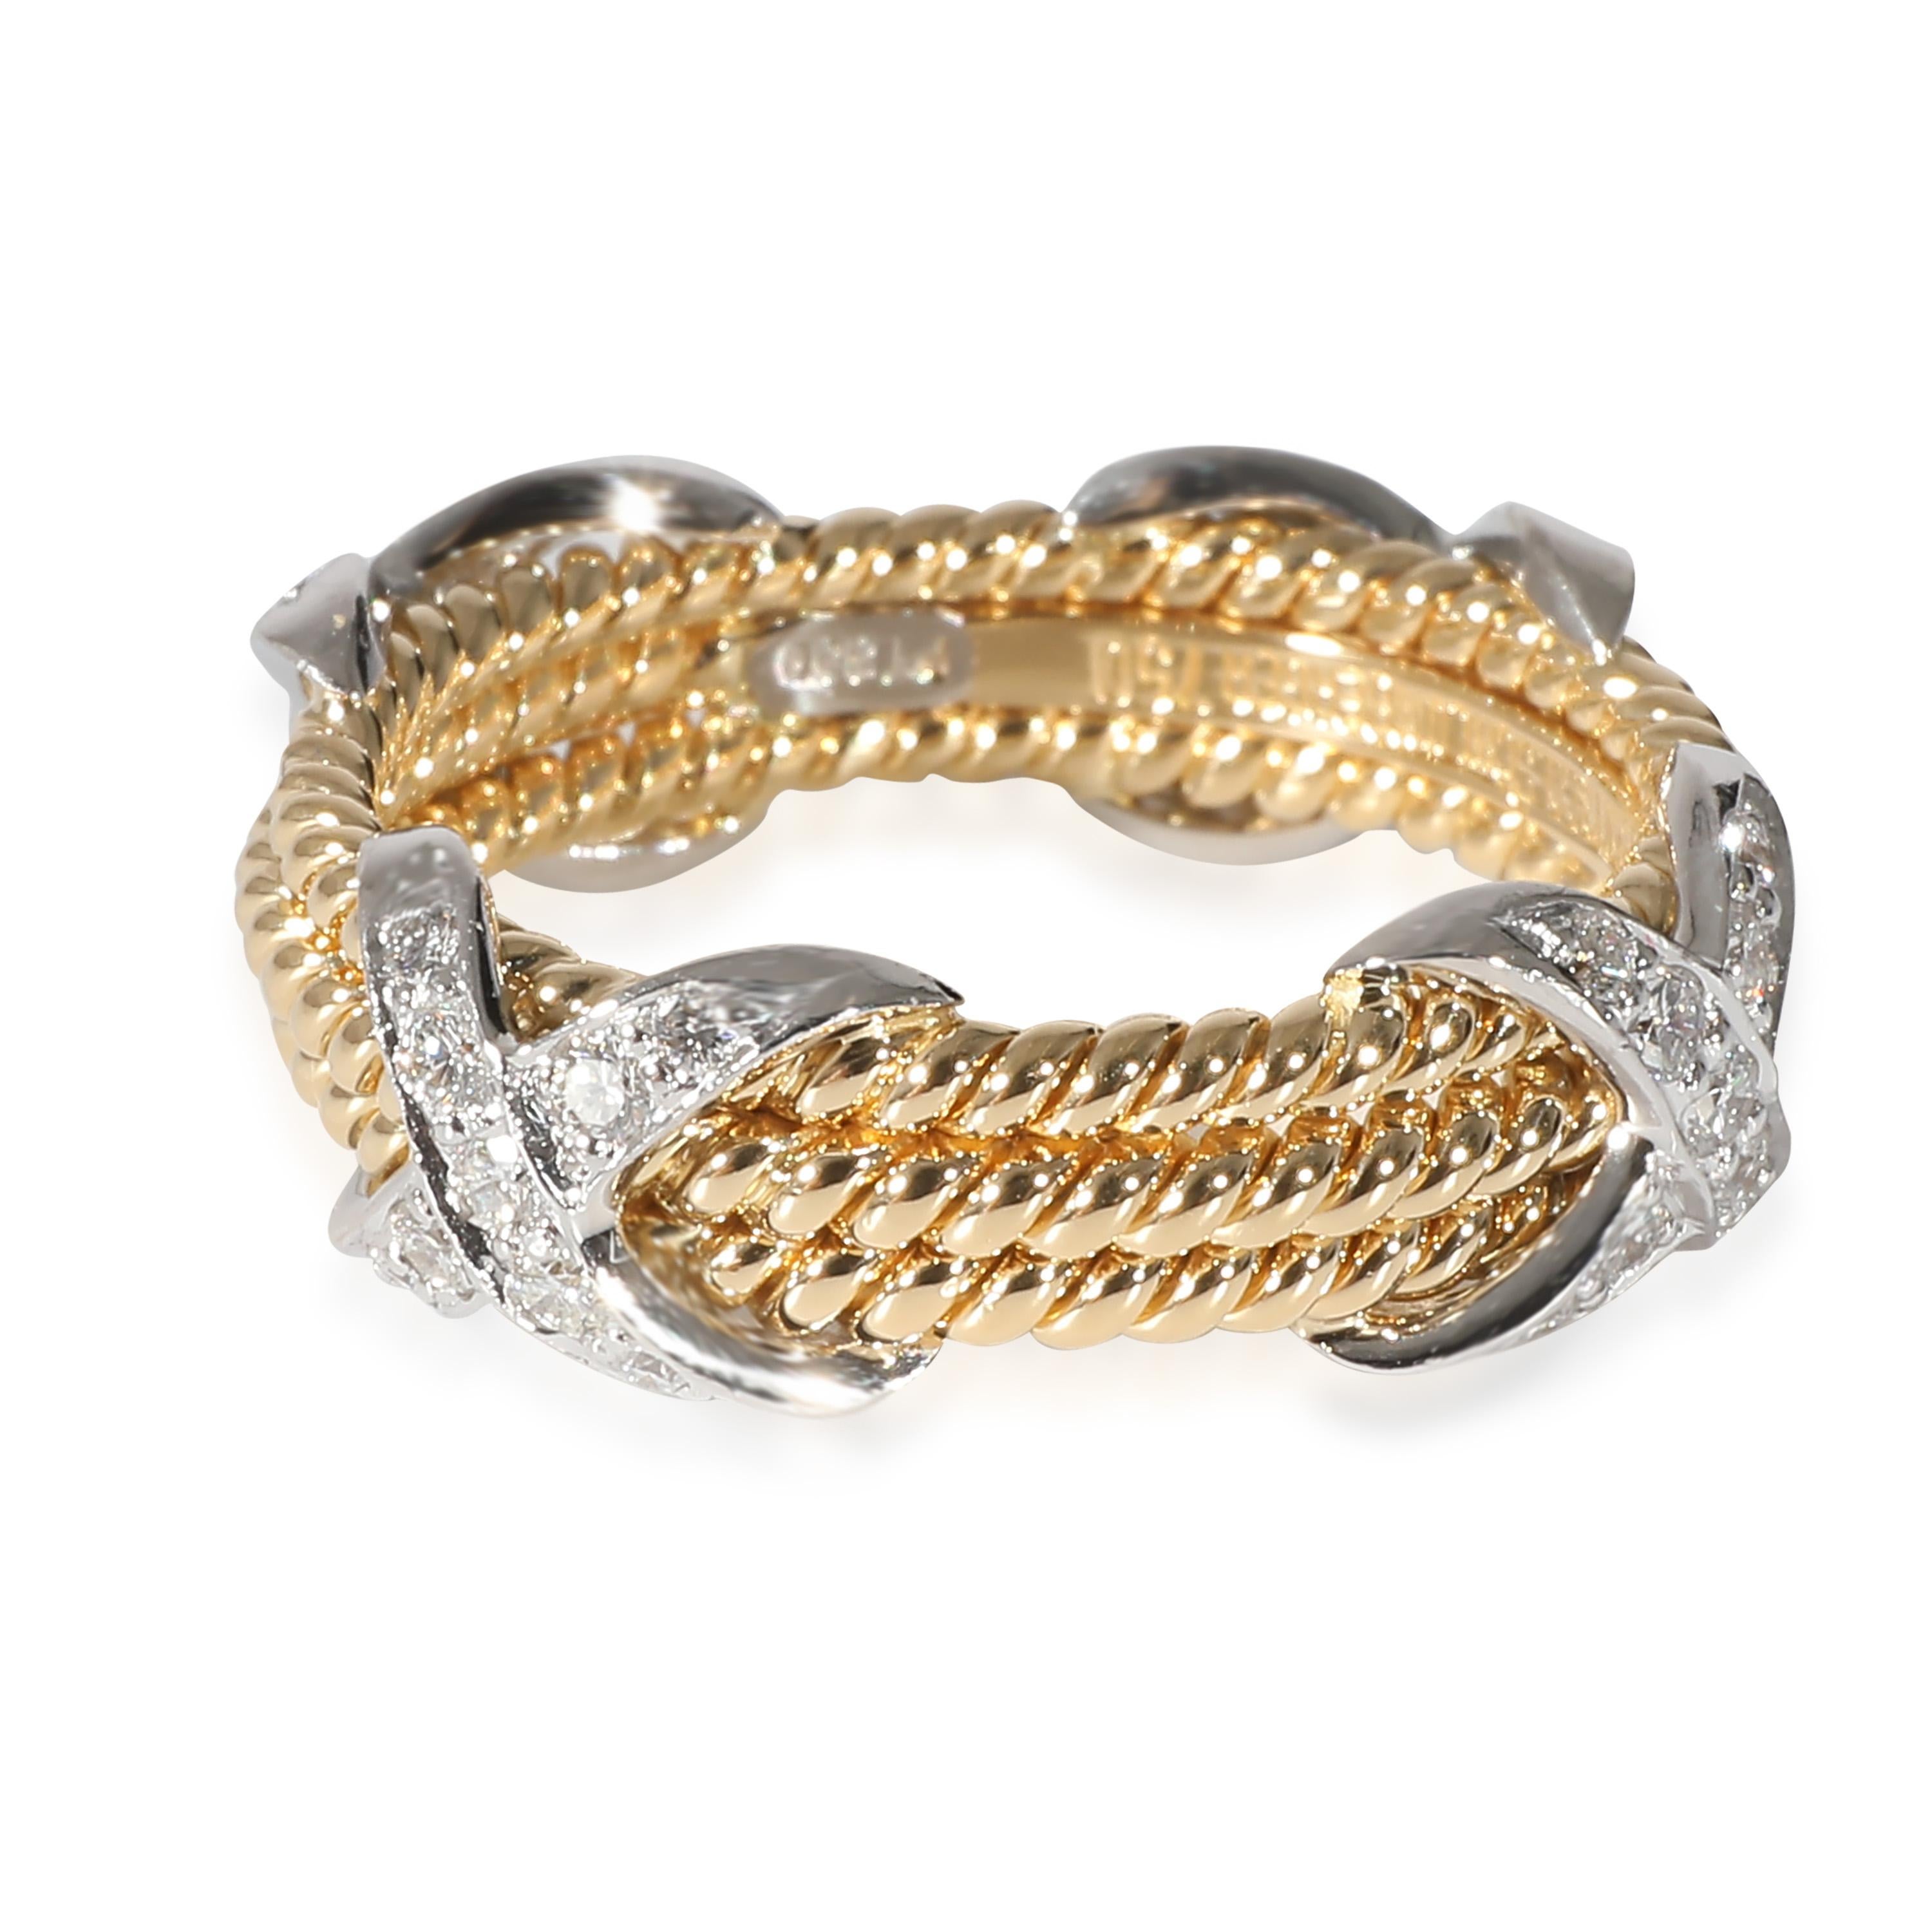 Tiffany & Co. Schlumberger Diamond X Ring in 18KT Yellow Gold/Platinum

PRIMARY DETAILS
SKU: 135333
Listing Title: Tiffany & Co. Schlumberger Diamond X Ring in 18KT Yellow Gold/Platinum
Condition Description: “I want to capture the irregularity of